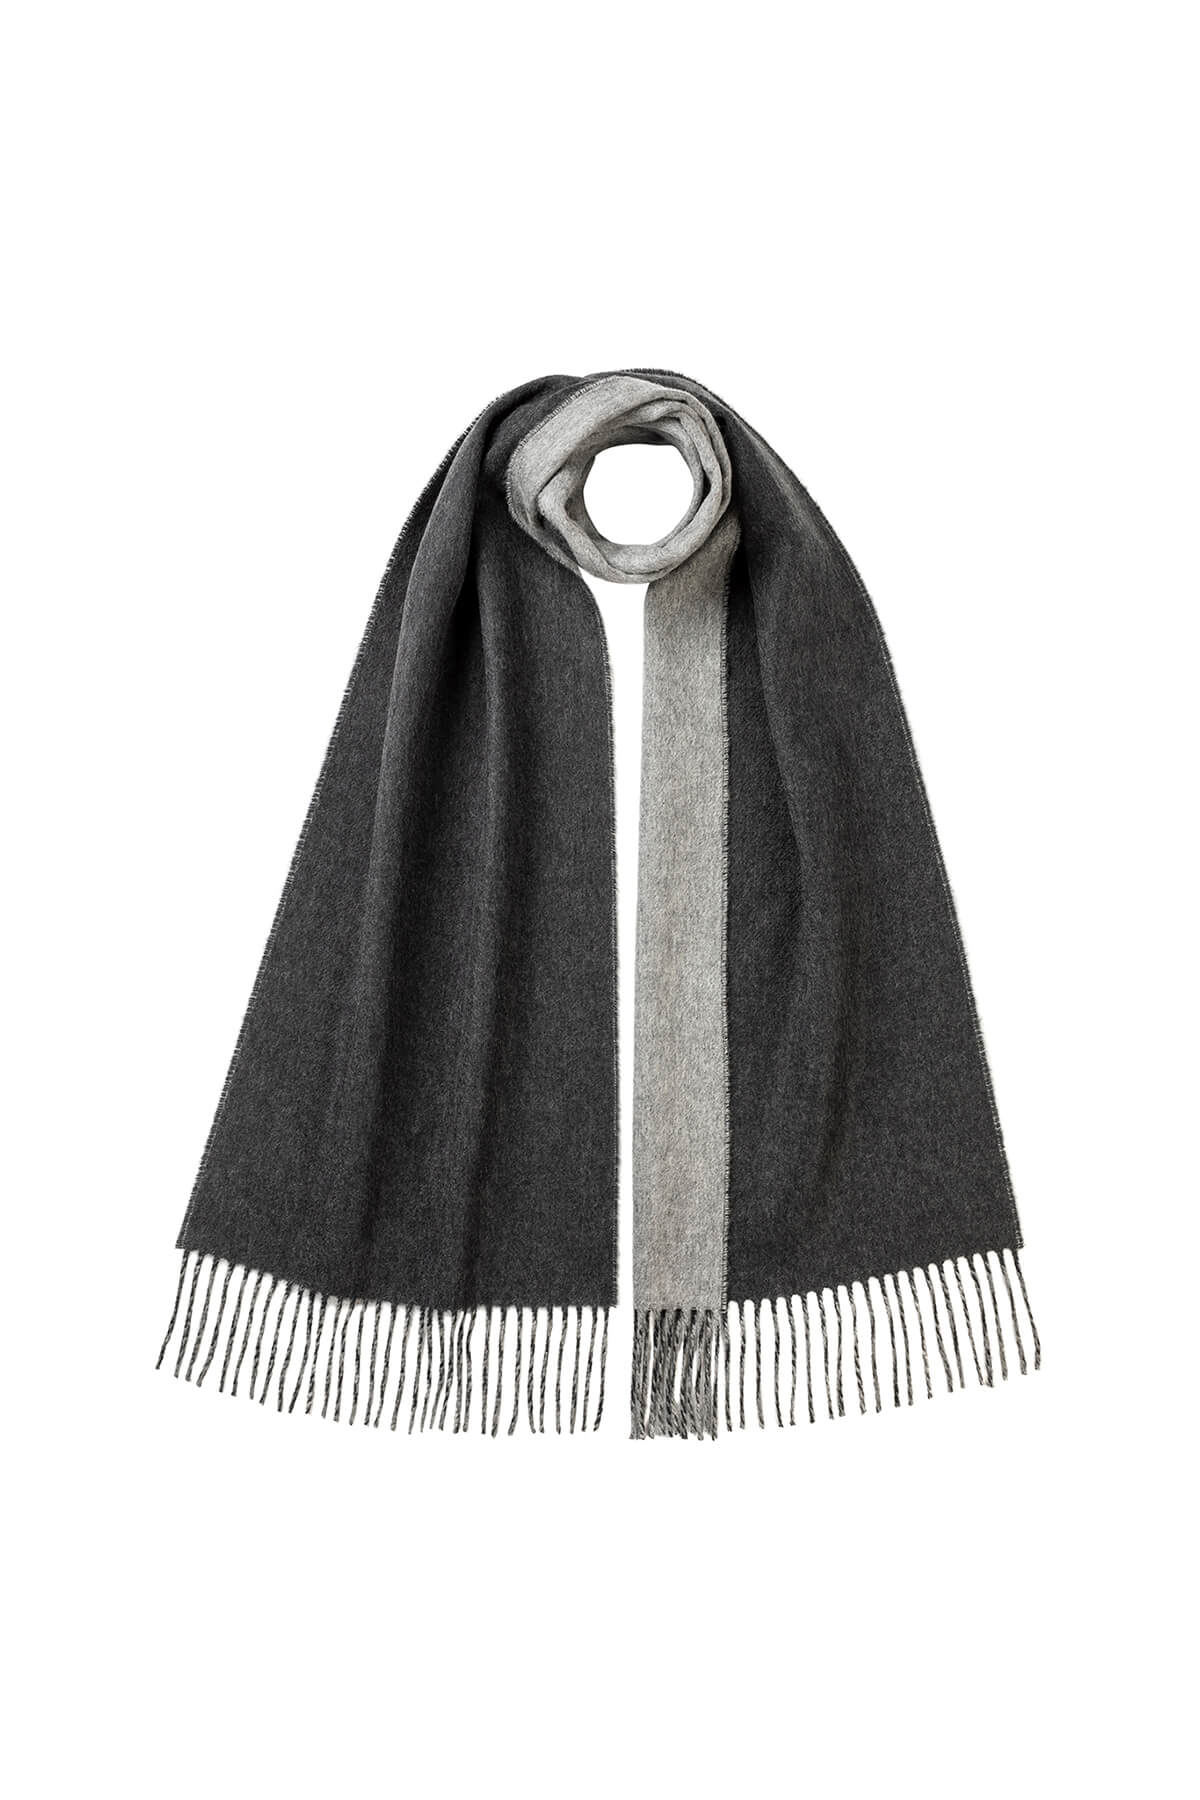 Johnstons of Elgin Reversible Cashmere Scarf in Charcoal & Grey on a white background WA000020RU5915N/A